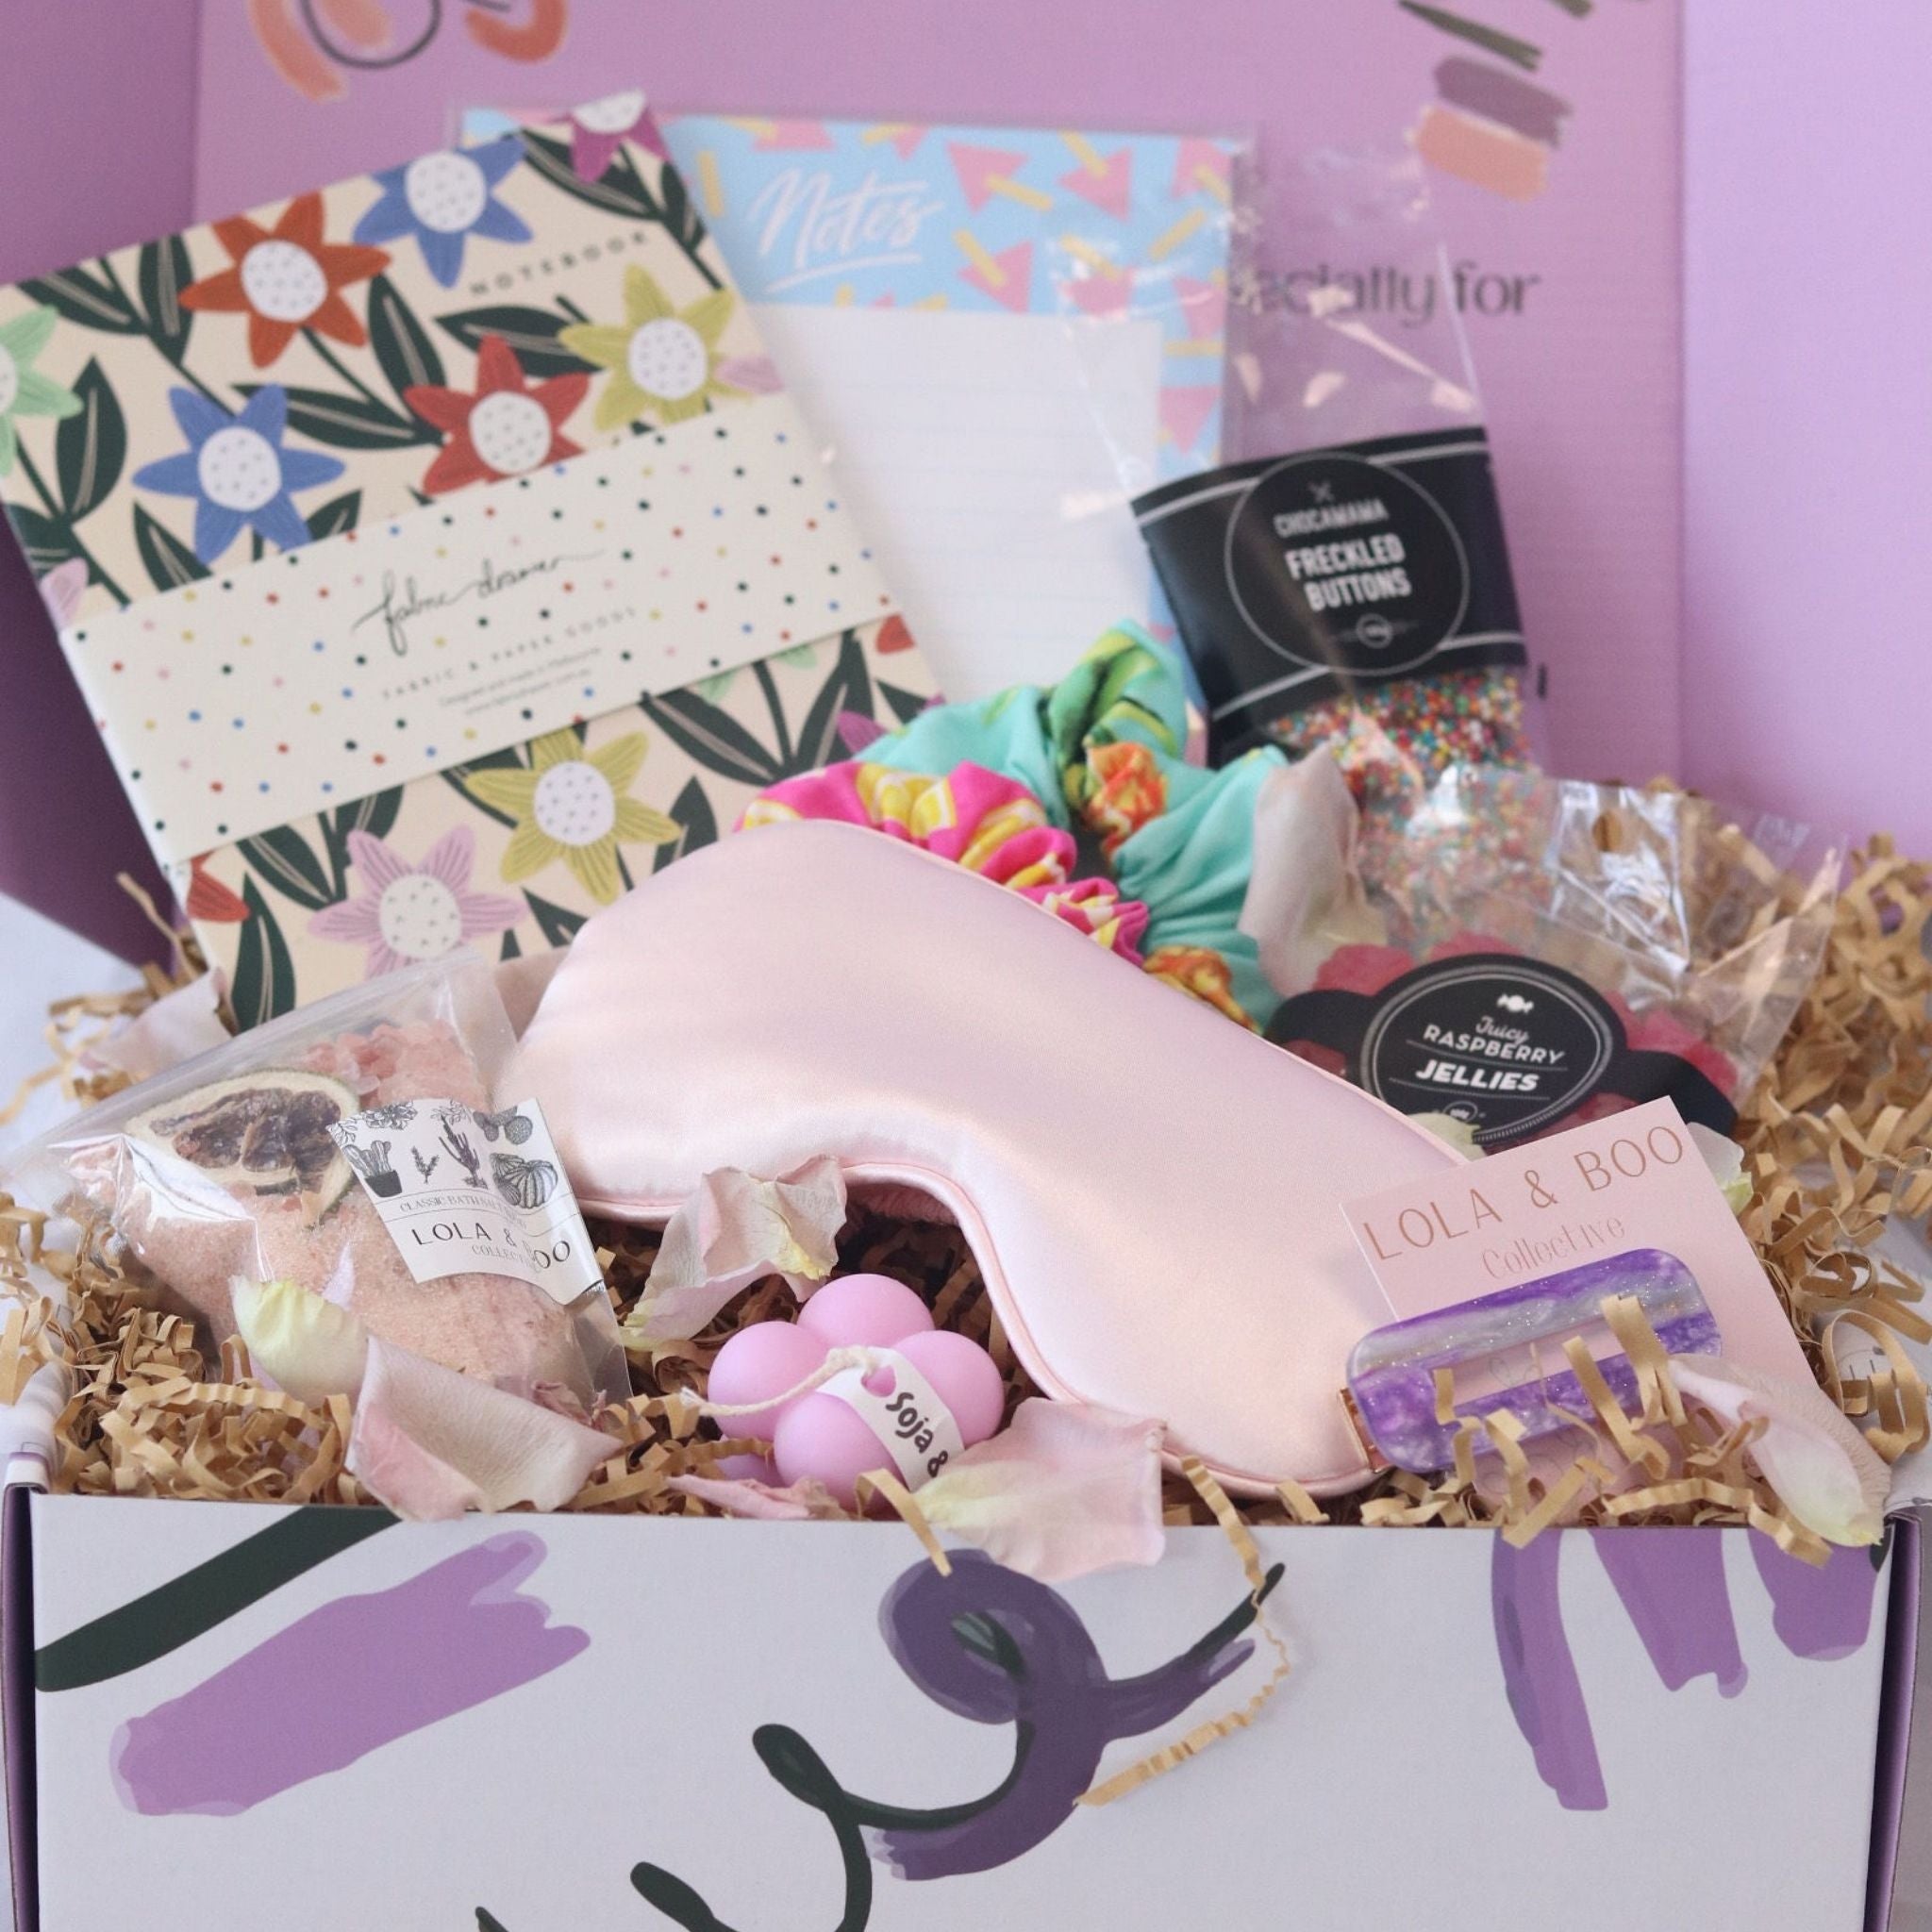 gift box filled with silk eye mask, hair clips, chocolate, candy, bath salt, book, note pad.